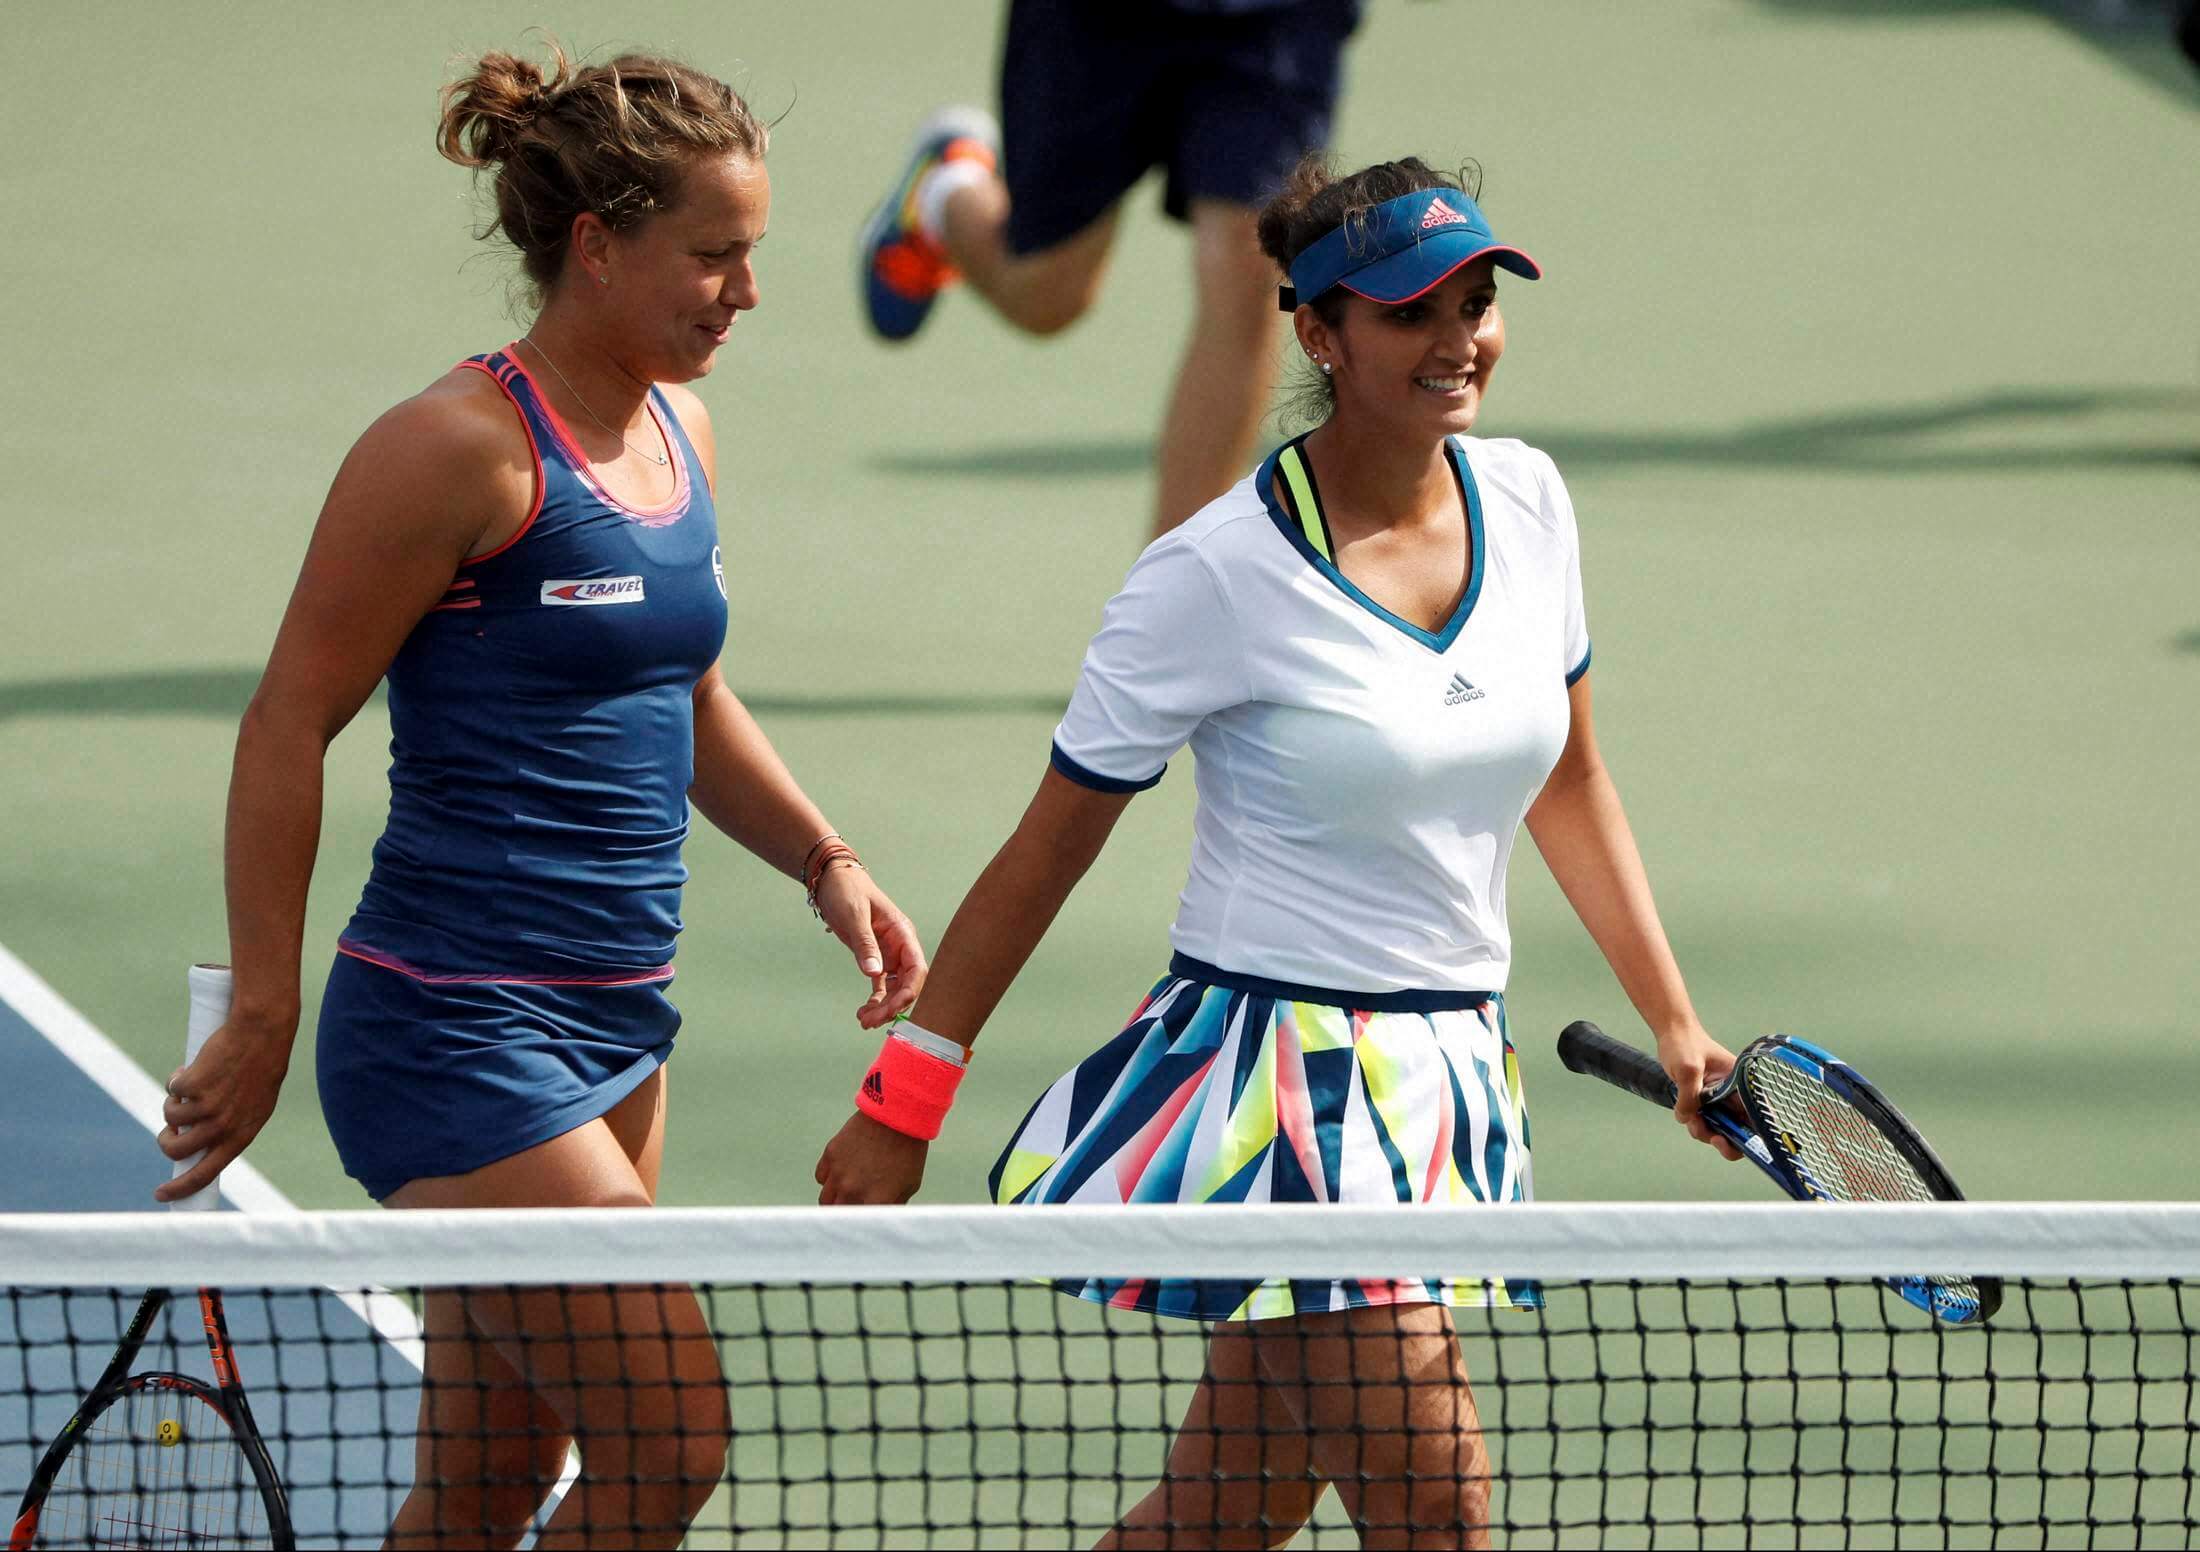 Sania-Strycova clinch Pan Pacific women’s doubles title